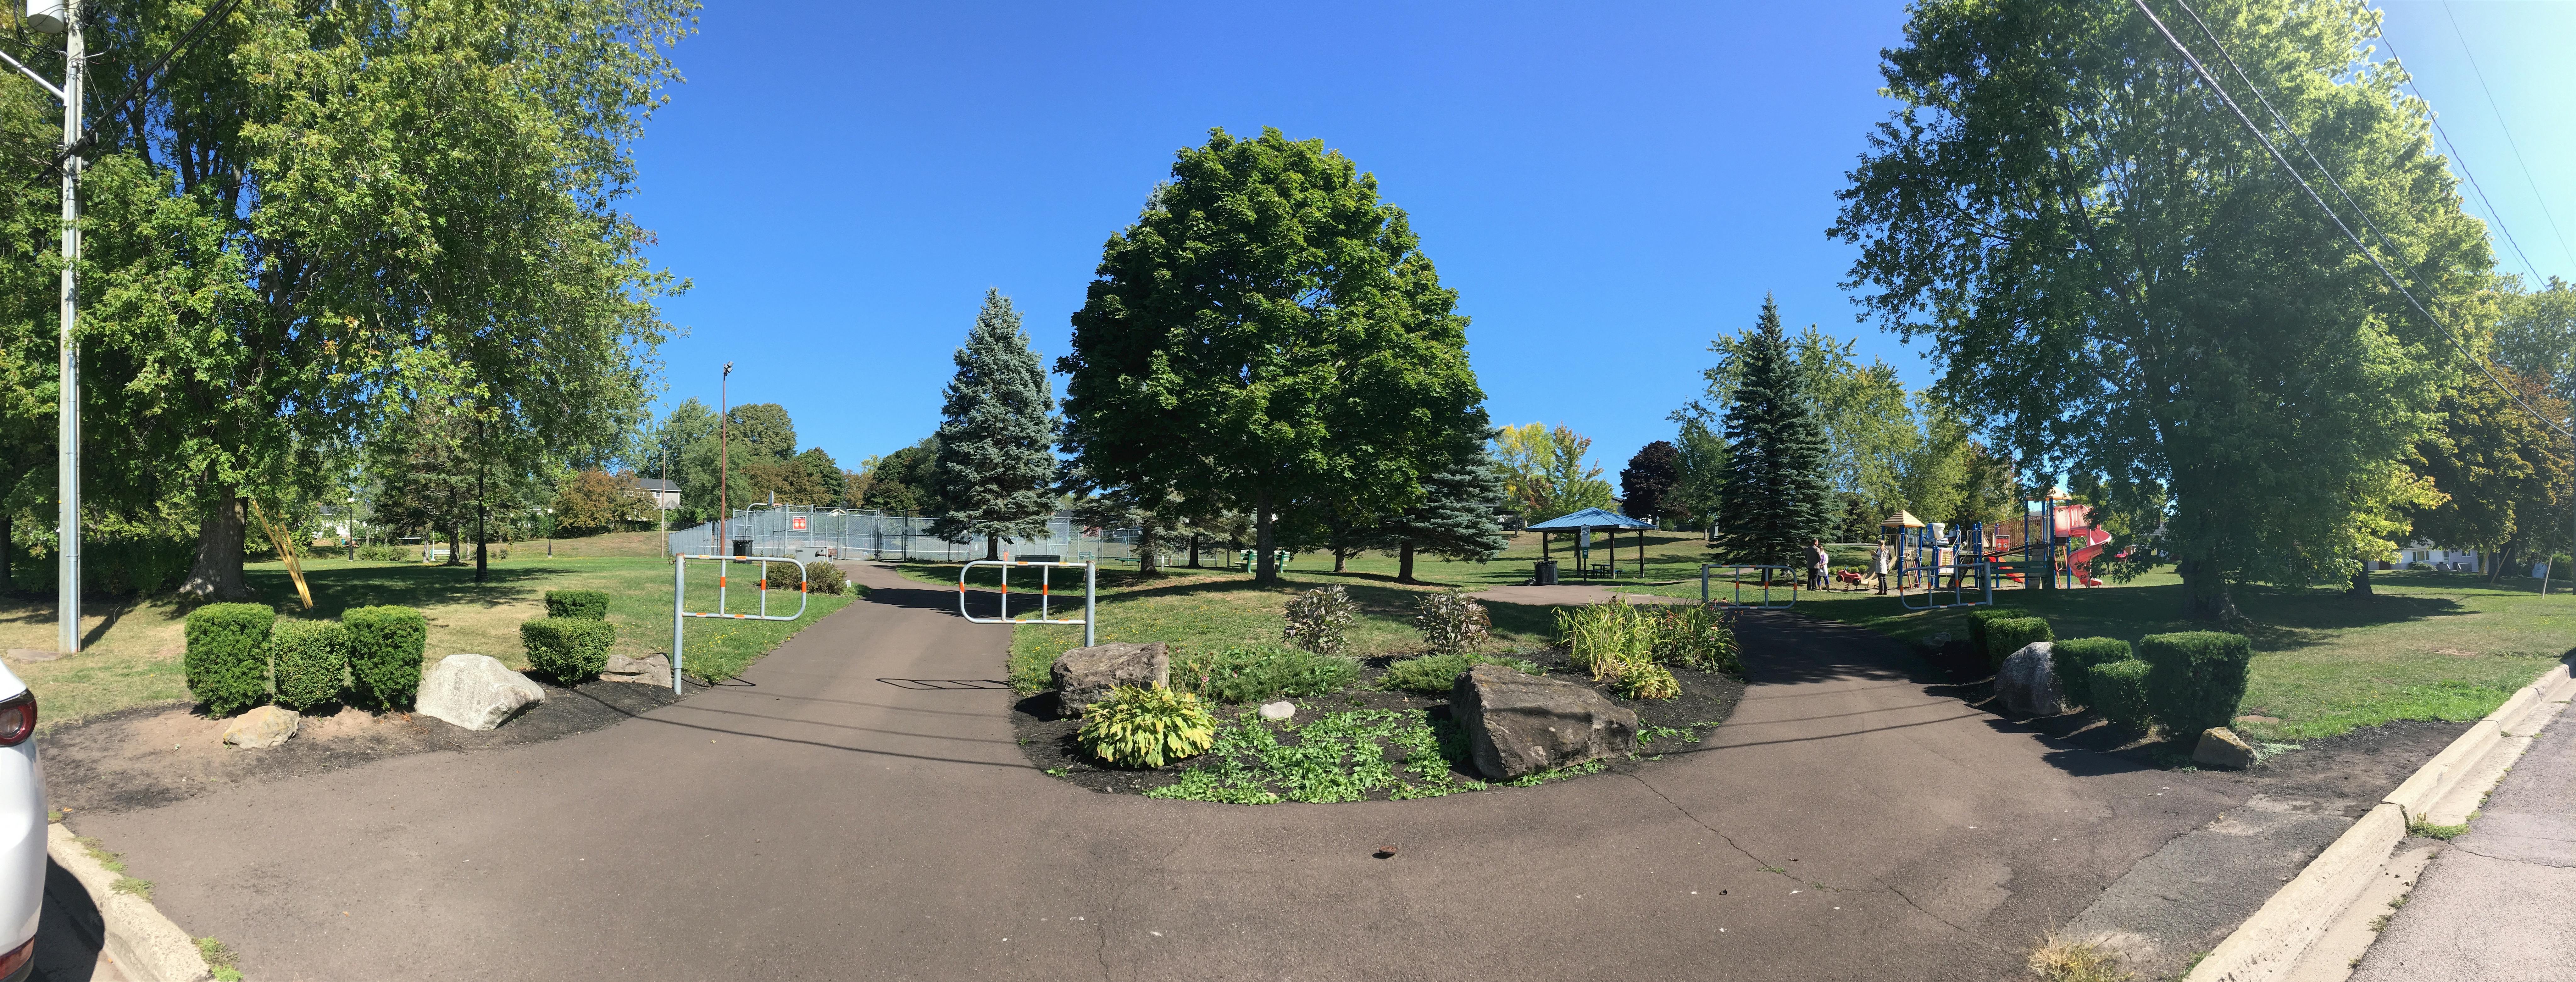 Panoramic view from entrance on Glenmoor Drive